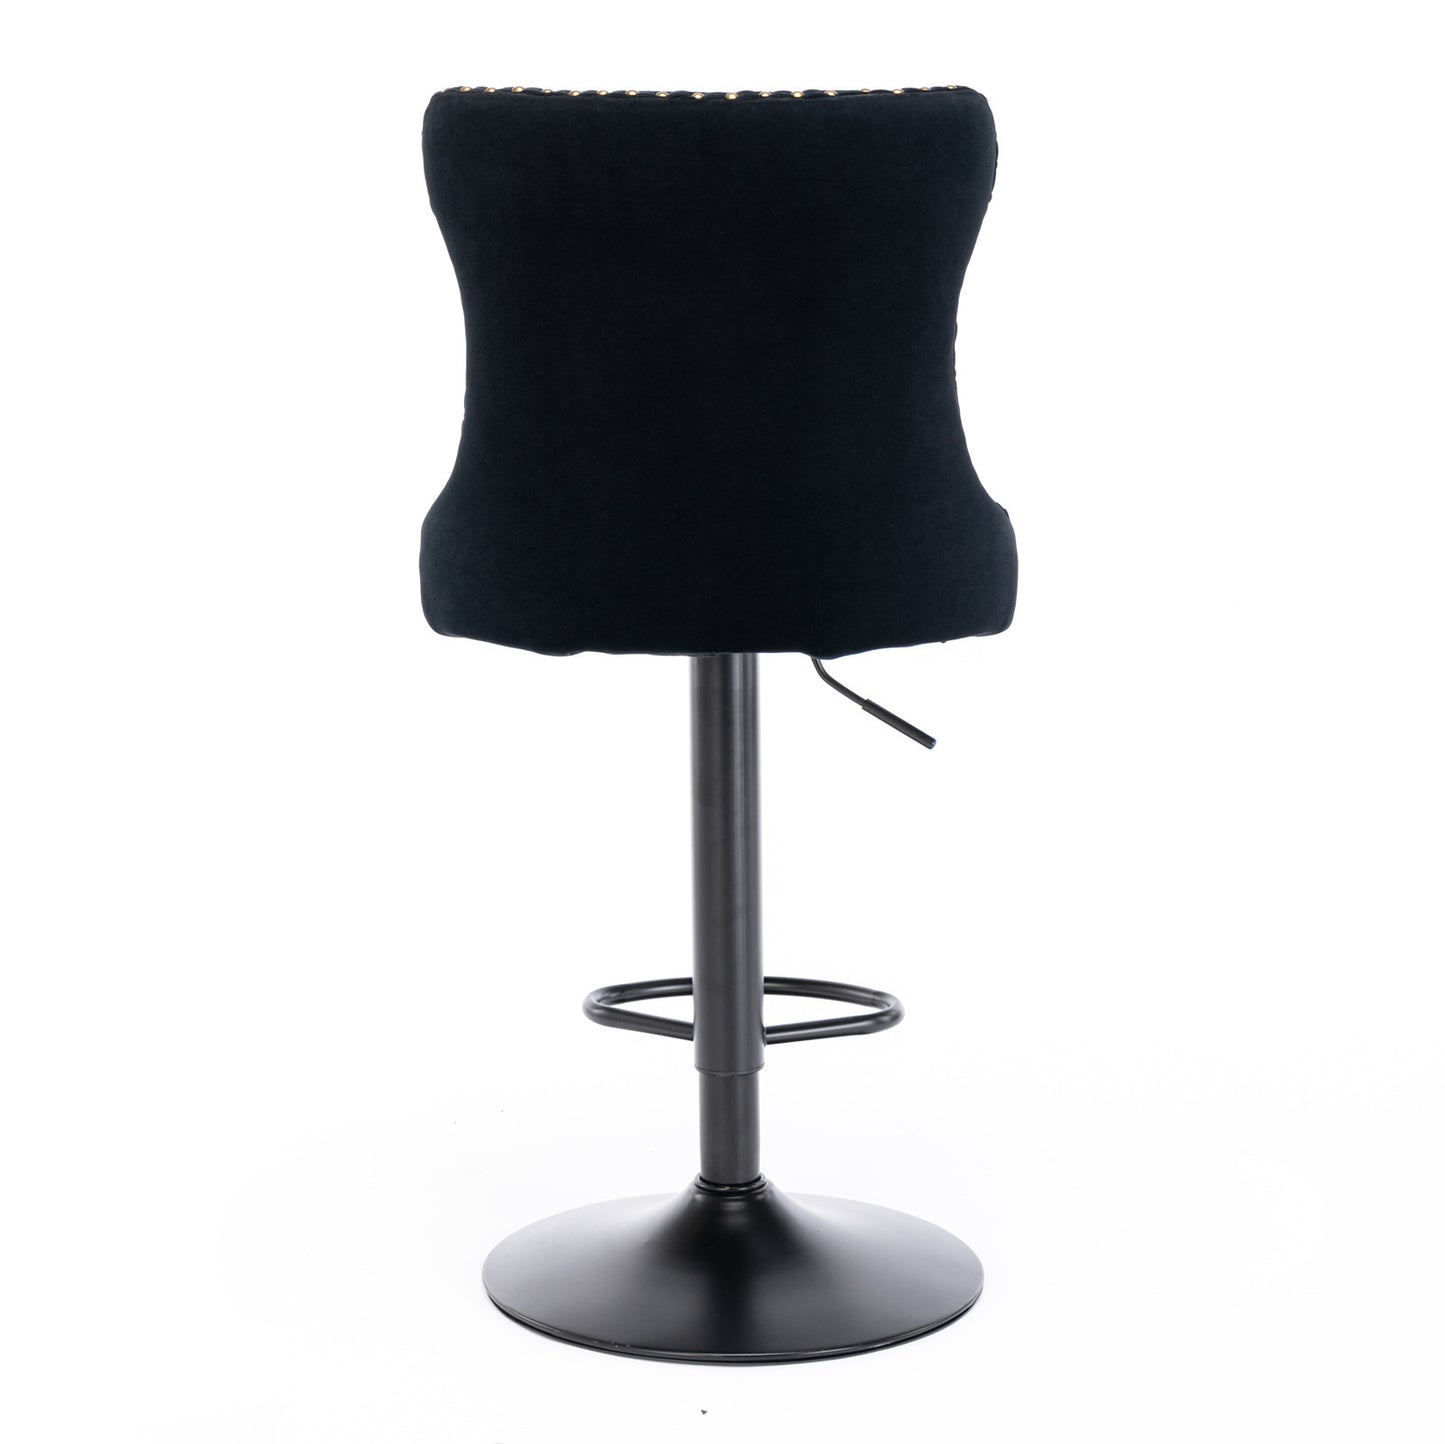 Swivel Velvet Barstools Adjusatble Seat Height from 25-33 Inch, Modern Upholstered Bar Stools with Backs Comfortable Tufted for Home Pub and Kitchen Island (Black, Set of 2)